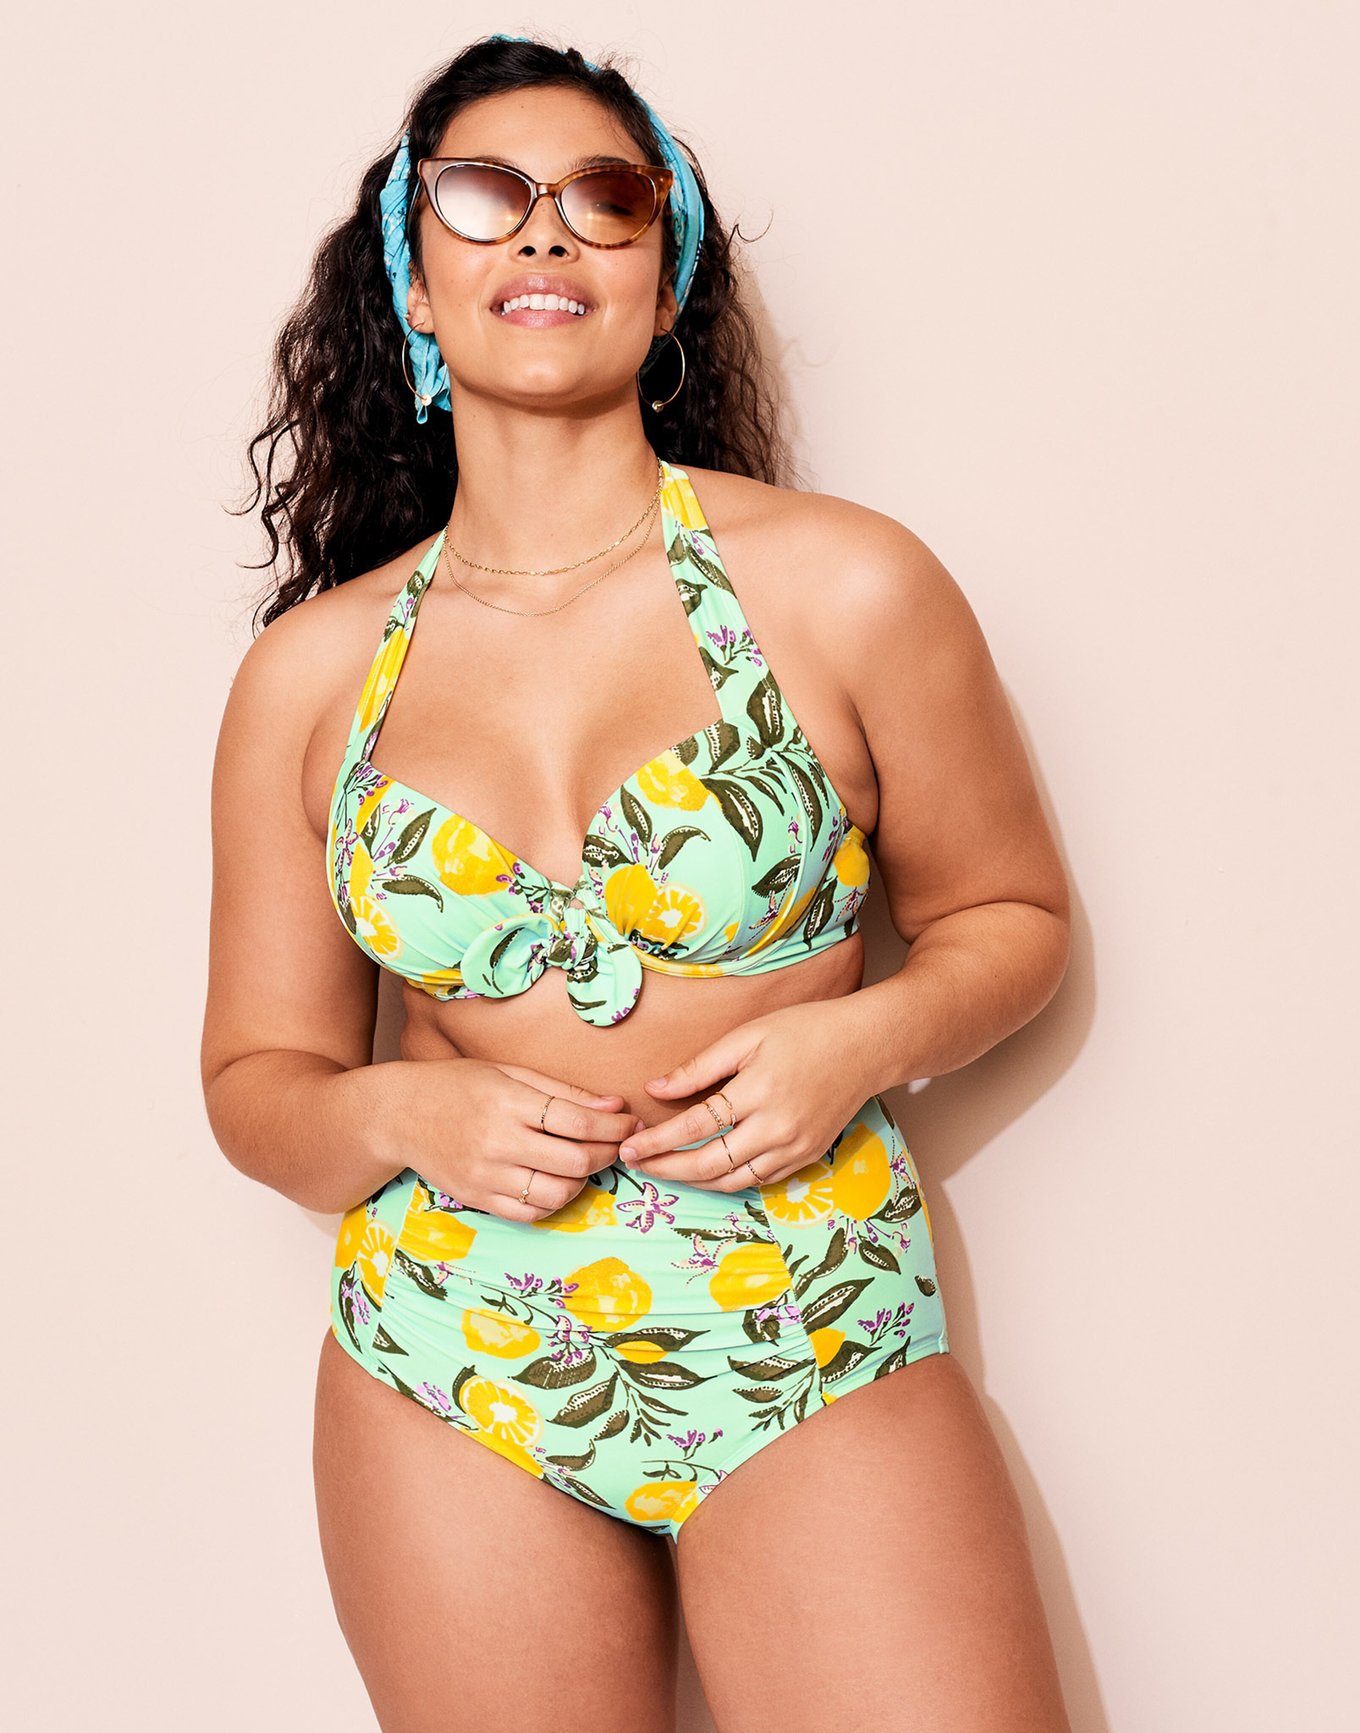 I Tried to Find the Perfect Plus-Size Swimsuit With Subscription Boxes